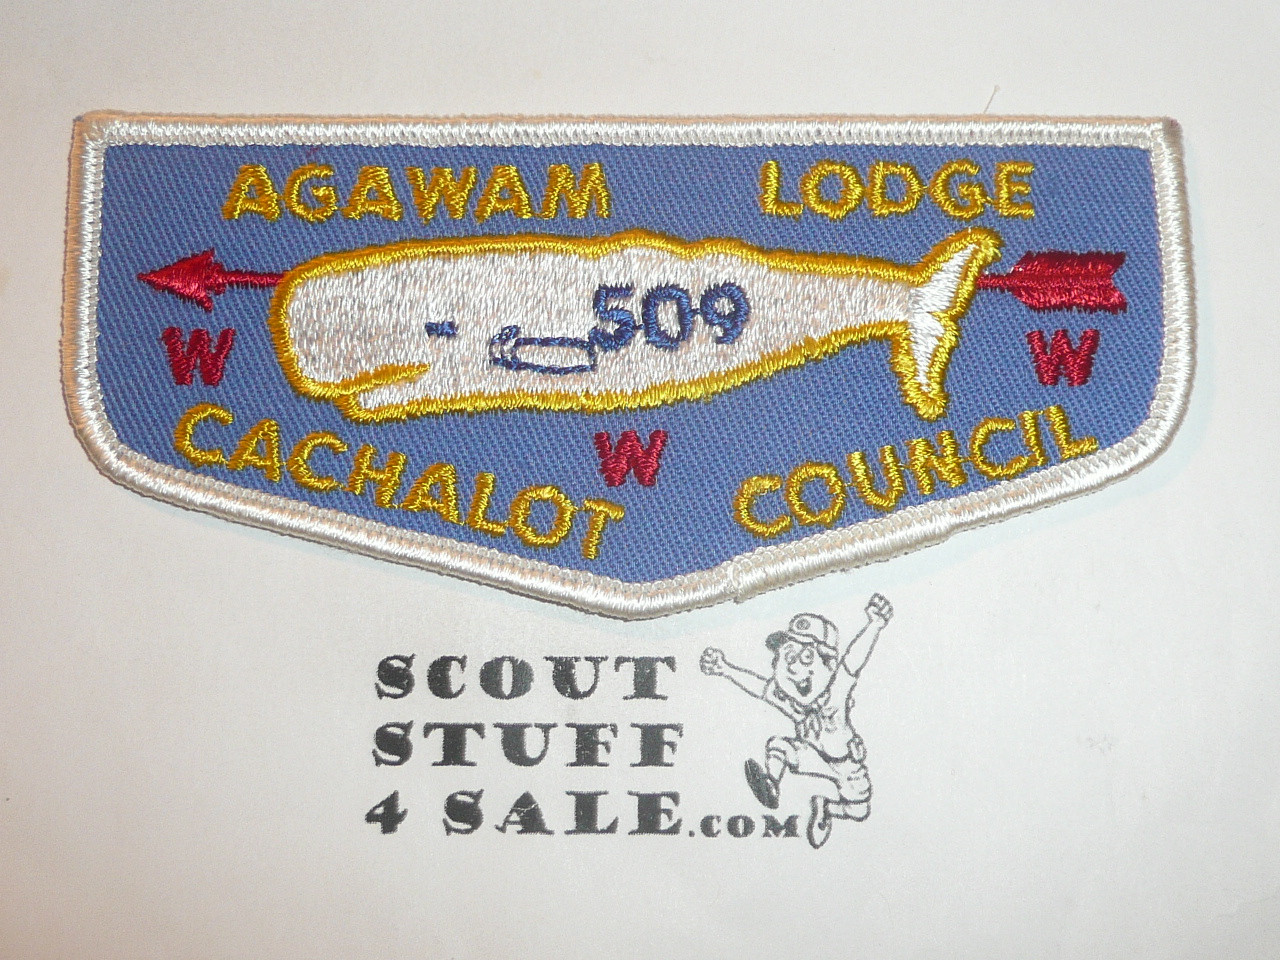 Order of the Arrow Lodge #509 Agawam f1 First Flap Patch